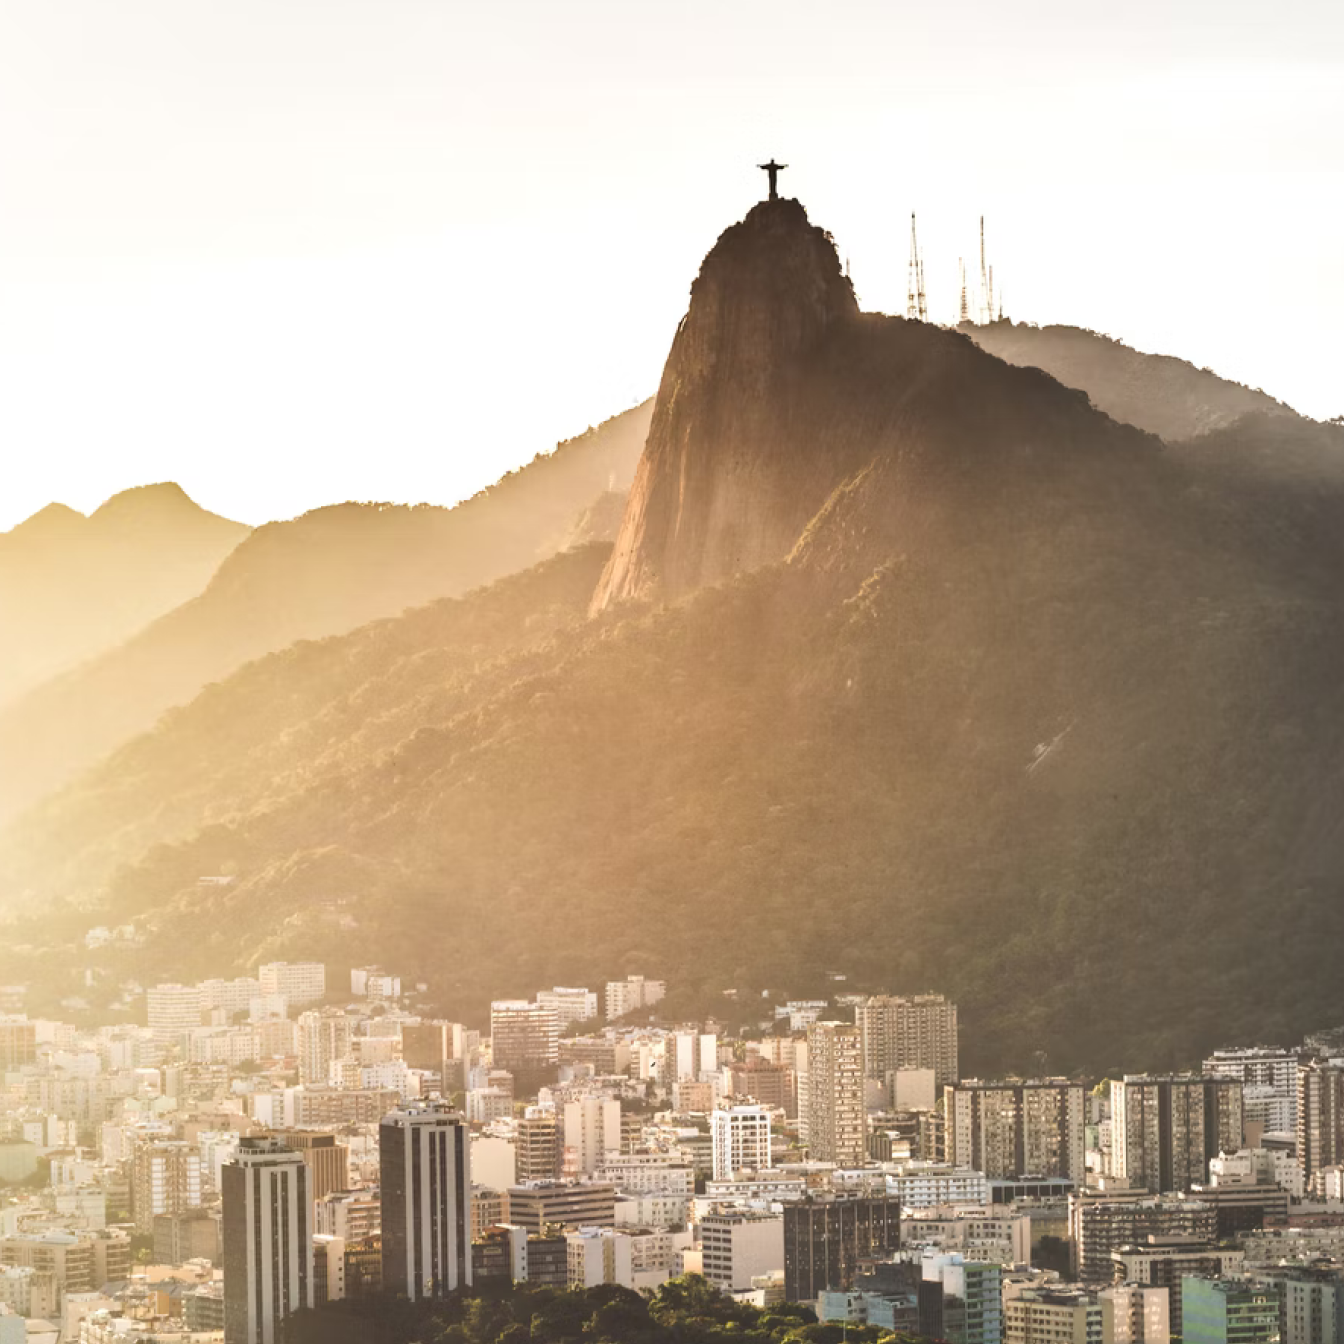 Sunrise over Rio de Janeiro in Brazil, with urban sprawl in front of hills and Christ The Redeemer statue on Mount Corcovado.